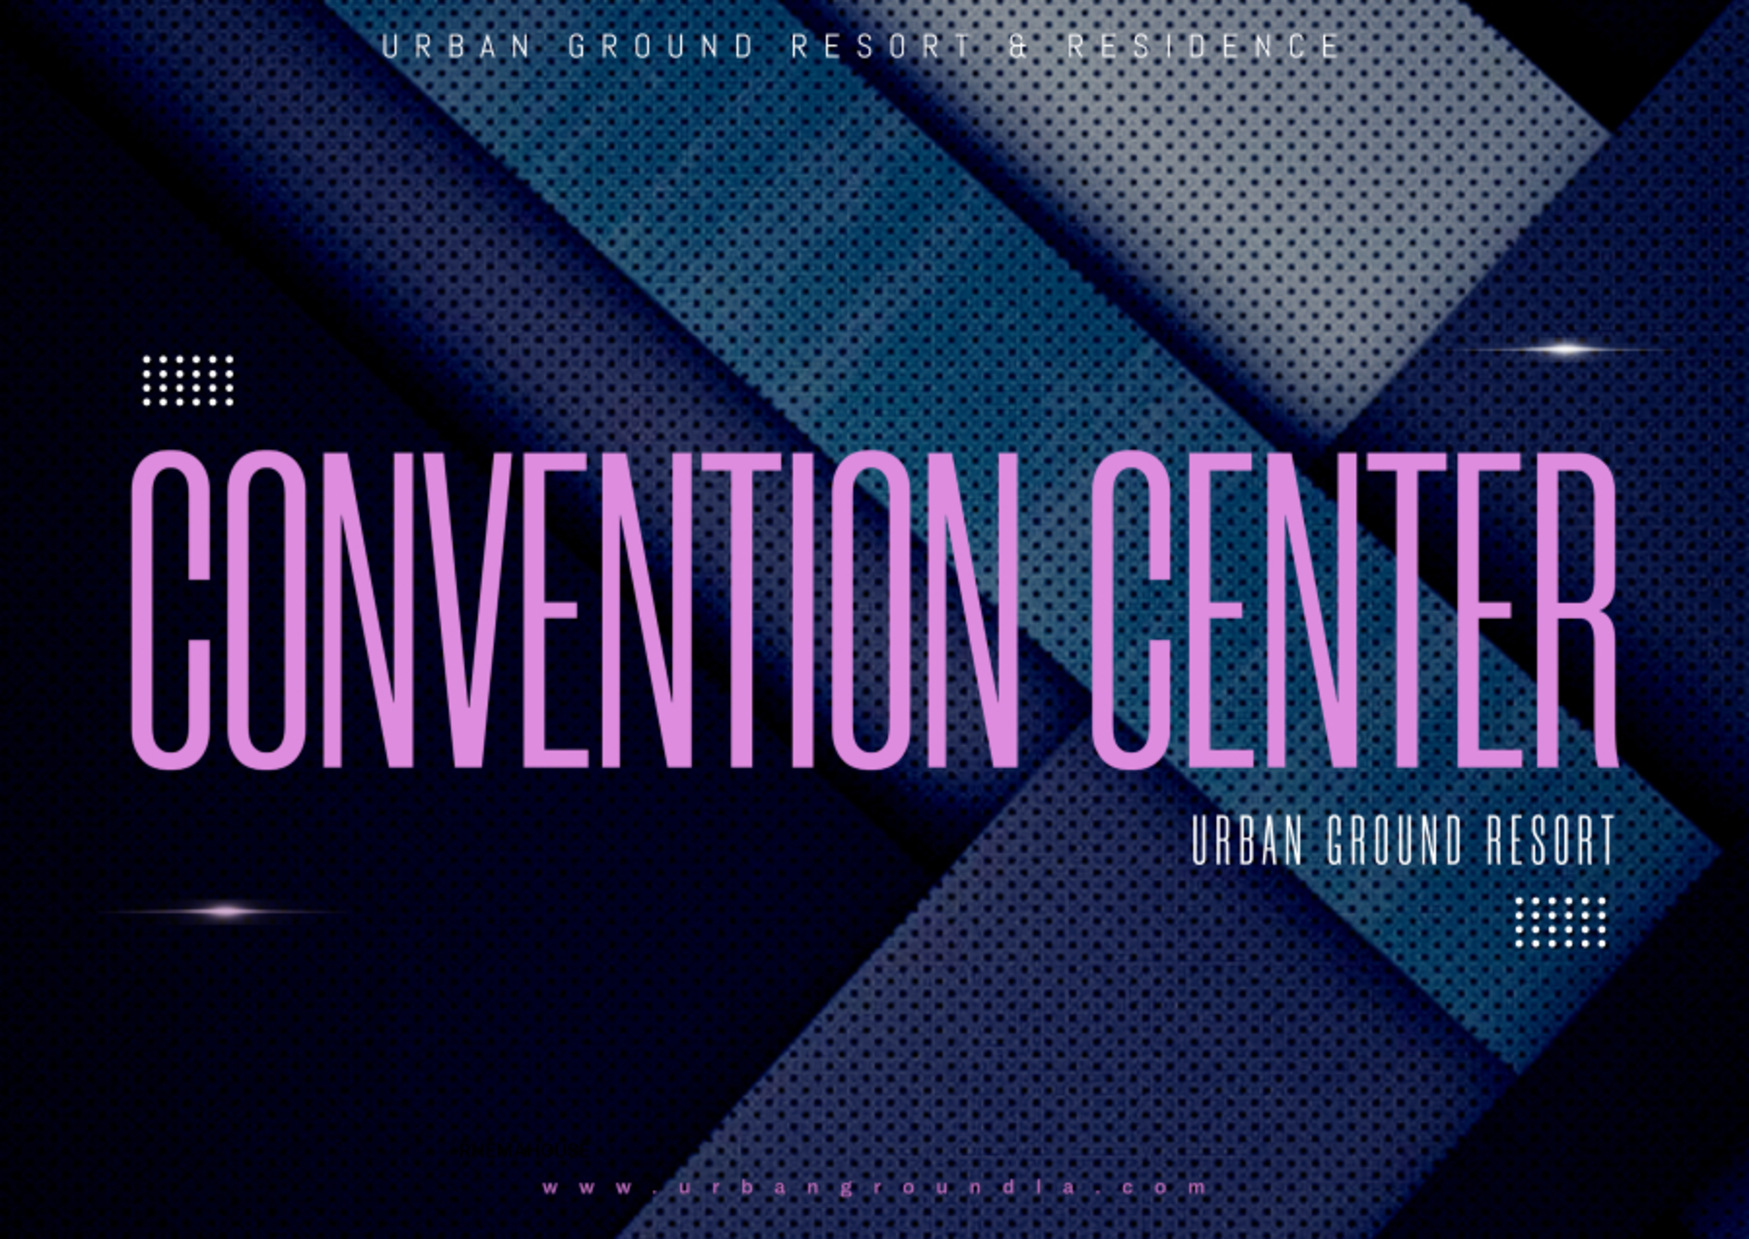 The Convention Center Urban Ground Resort & Residence